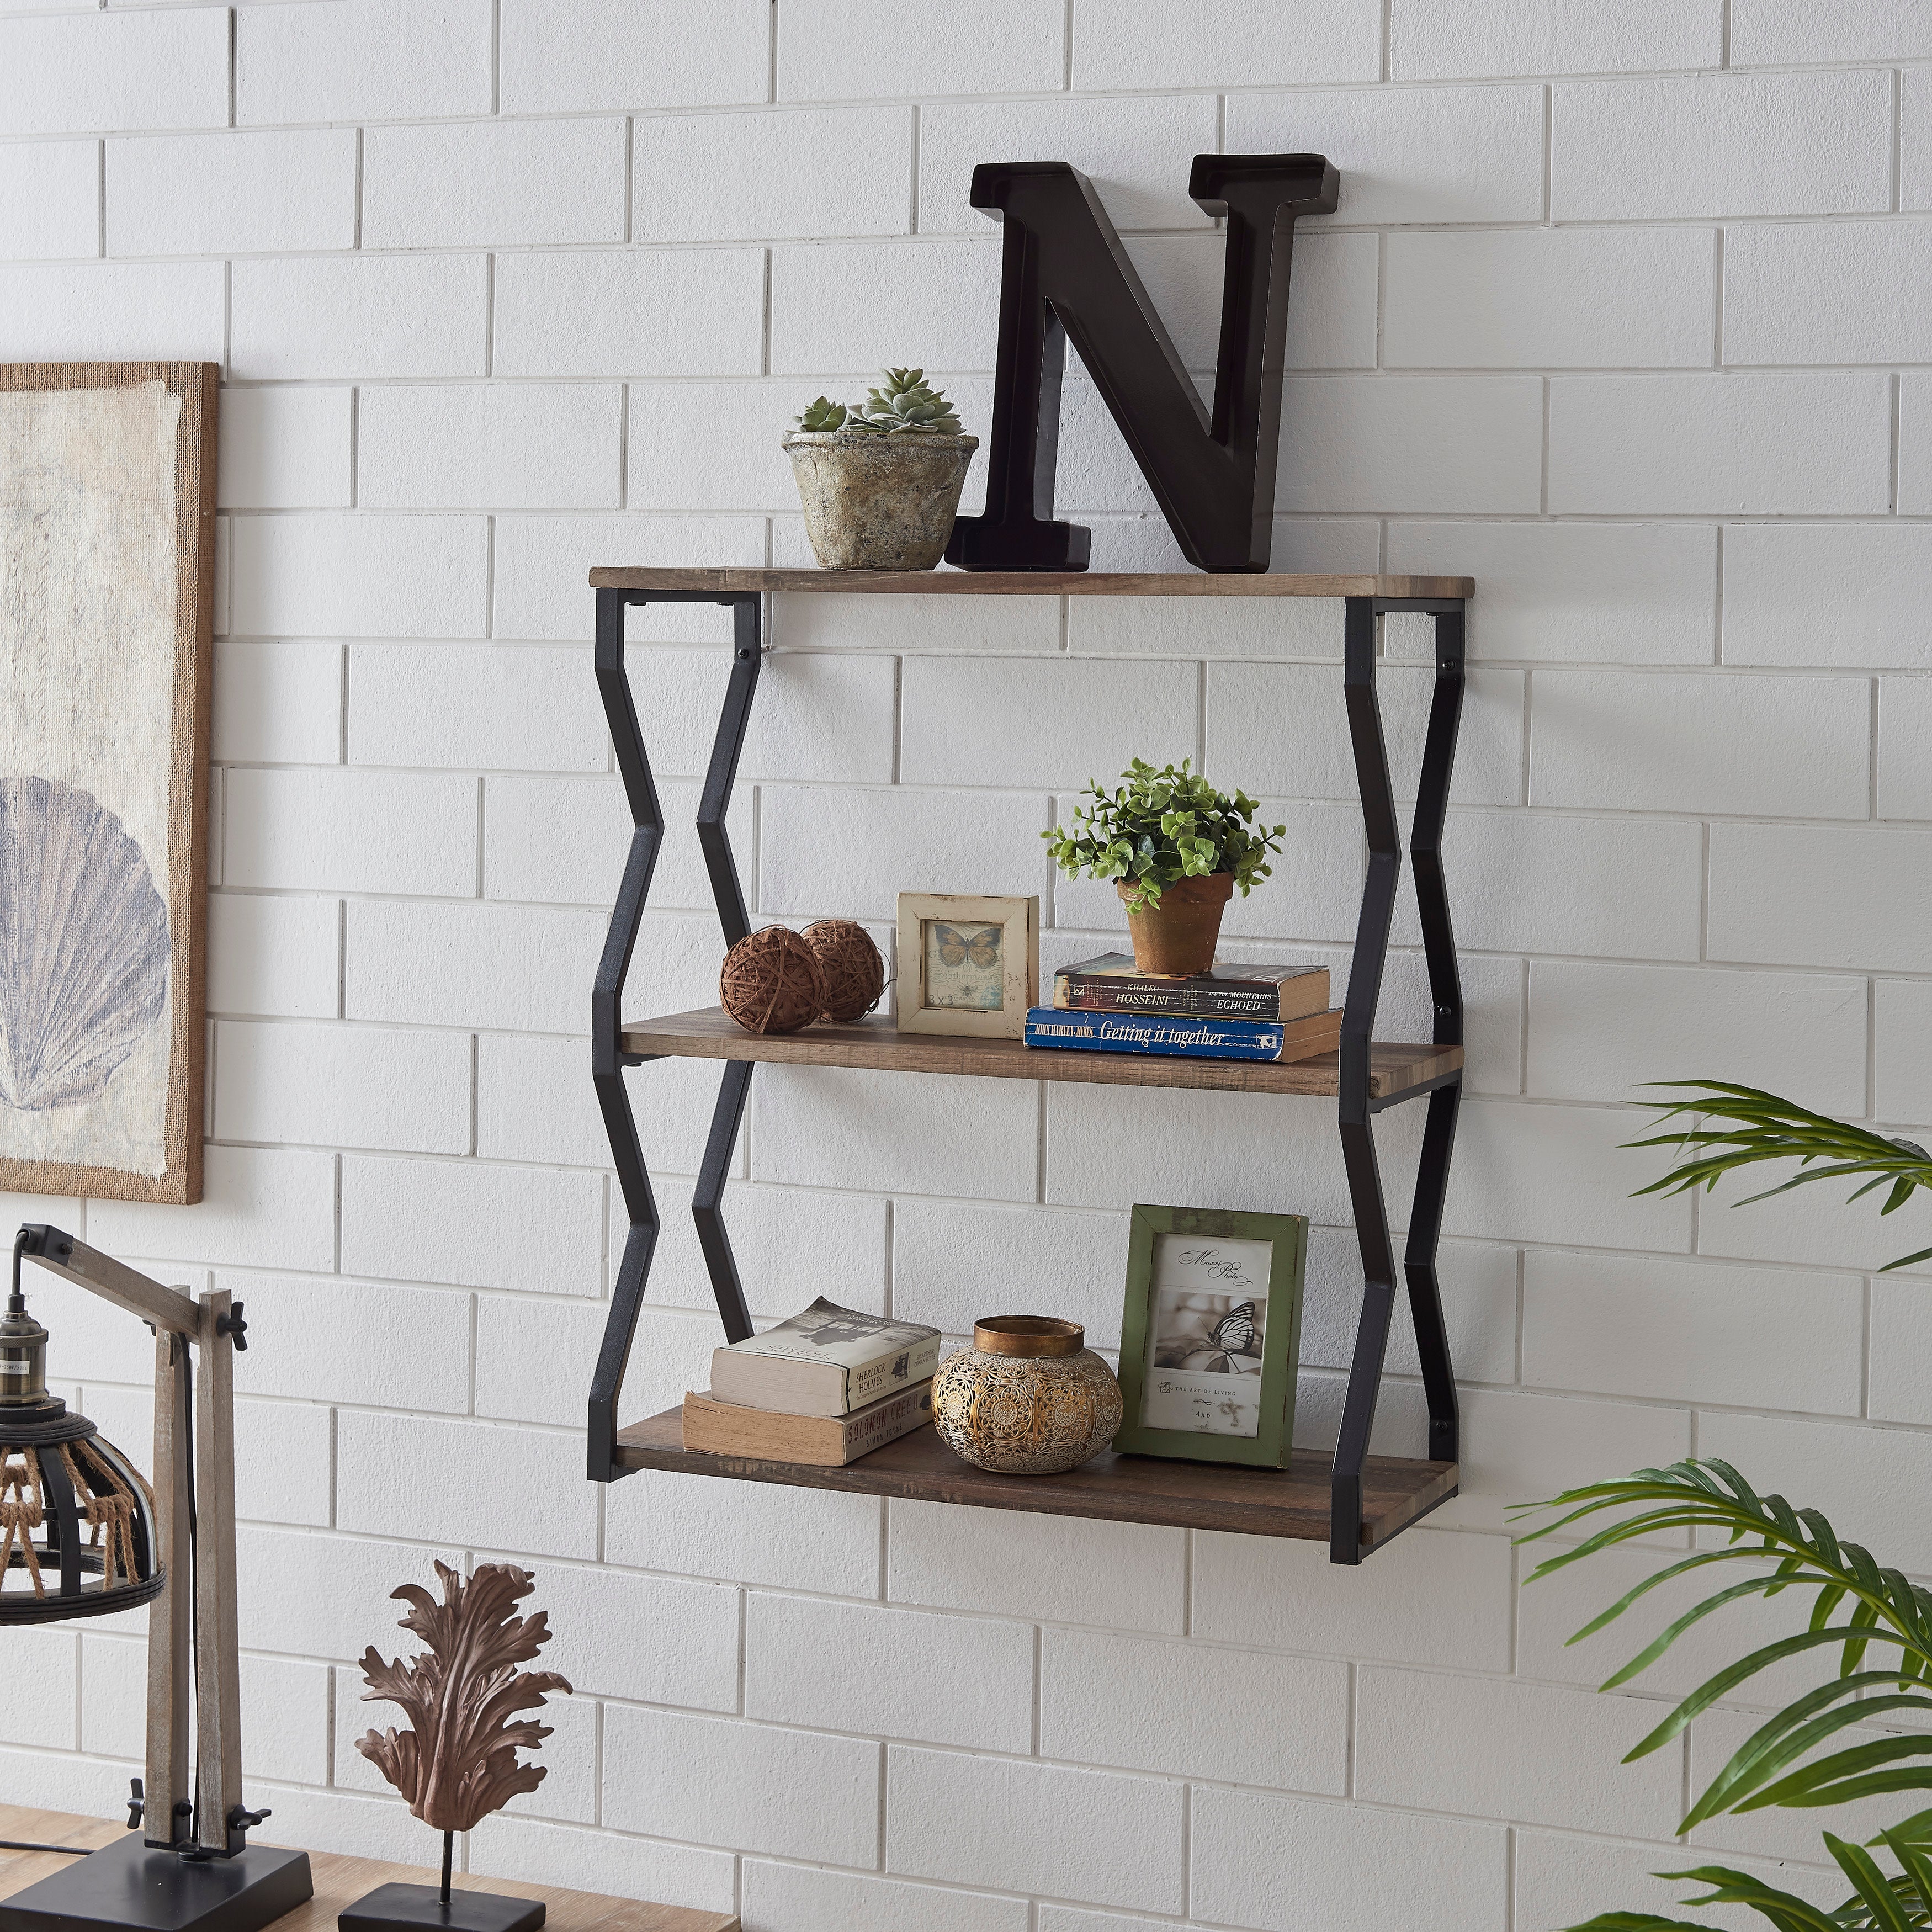 Free Shipping on 3-Tier Modern Wall Mounted Shelves Long Floating